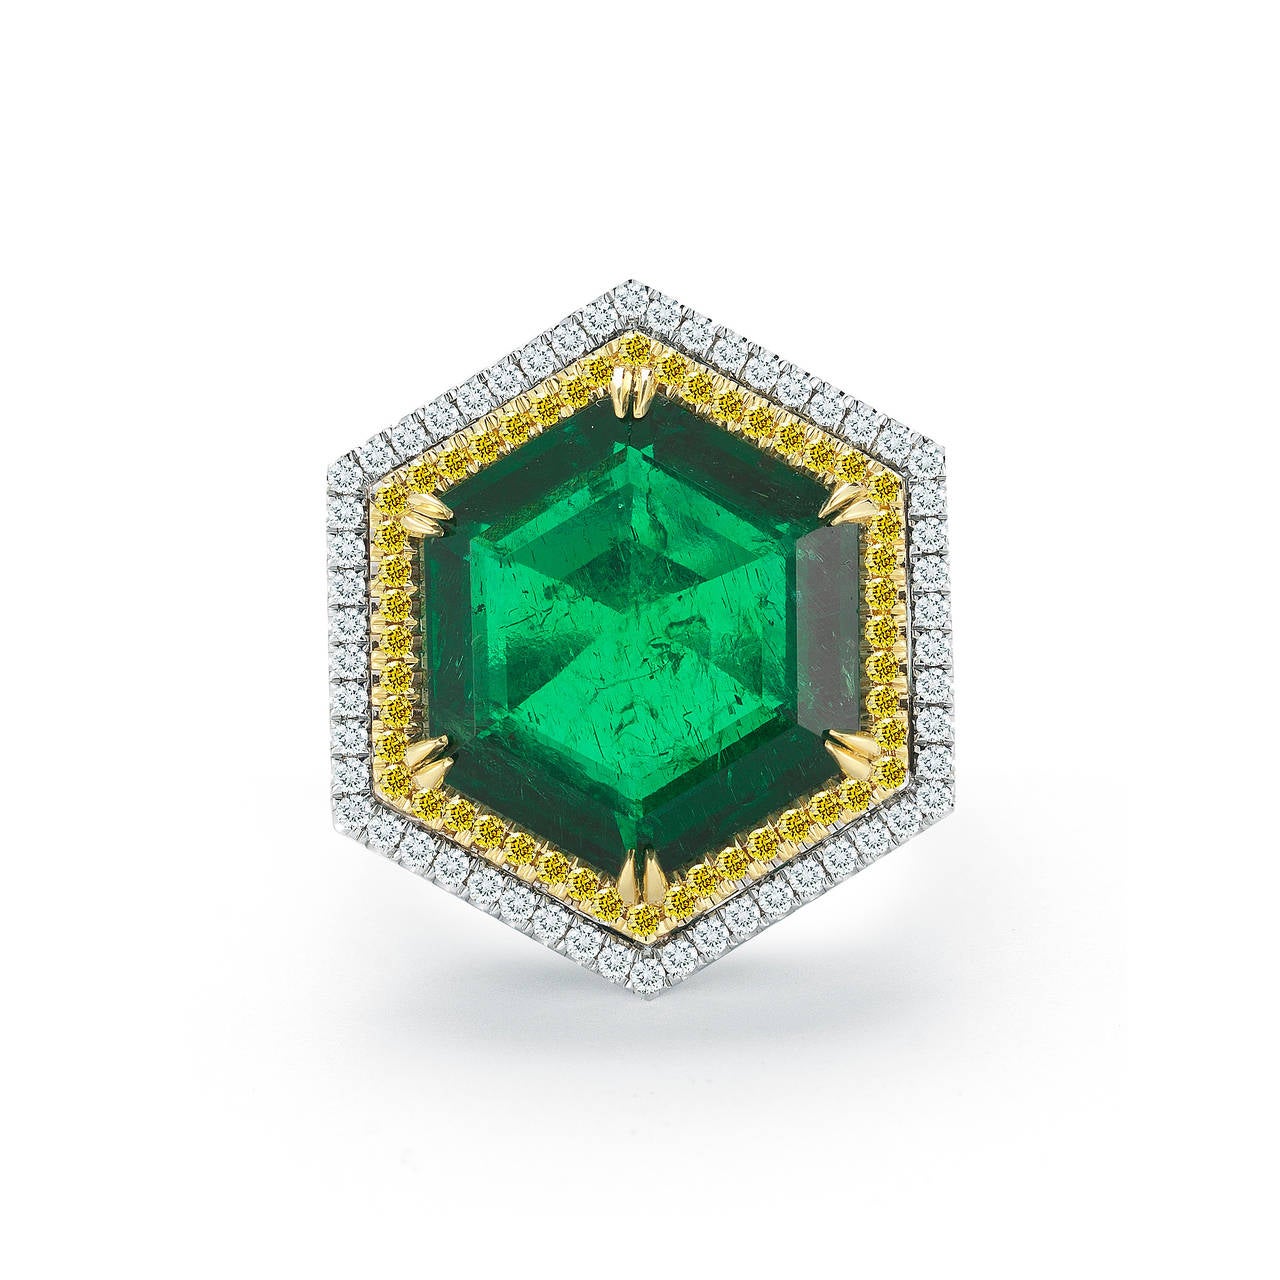 Amazing Zambian Emerald Hexagonal Shape With Fancy Yellow And White Diamonds. This Emerald is Certified By GRS (Minor).
Product ID:02379
Model:TK MB 530
Metal:18K W
Gram Weight:19.20
Stock:1
Ring Size:7
Country Of Origin:USA
* Resize your